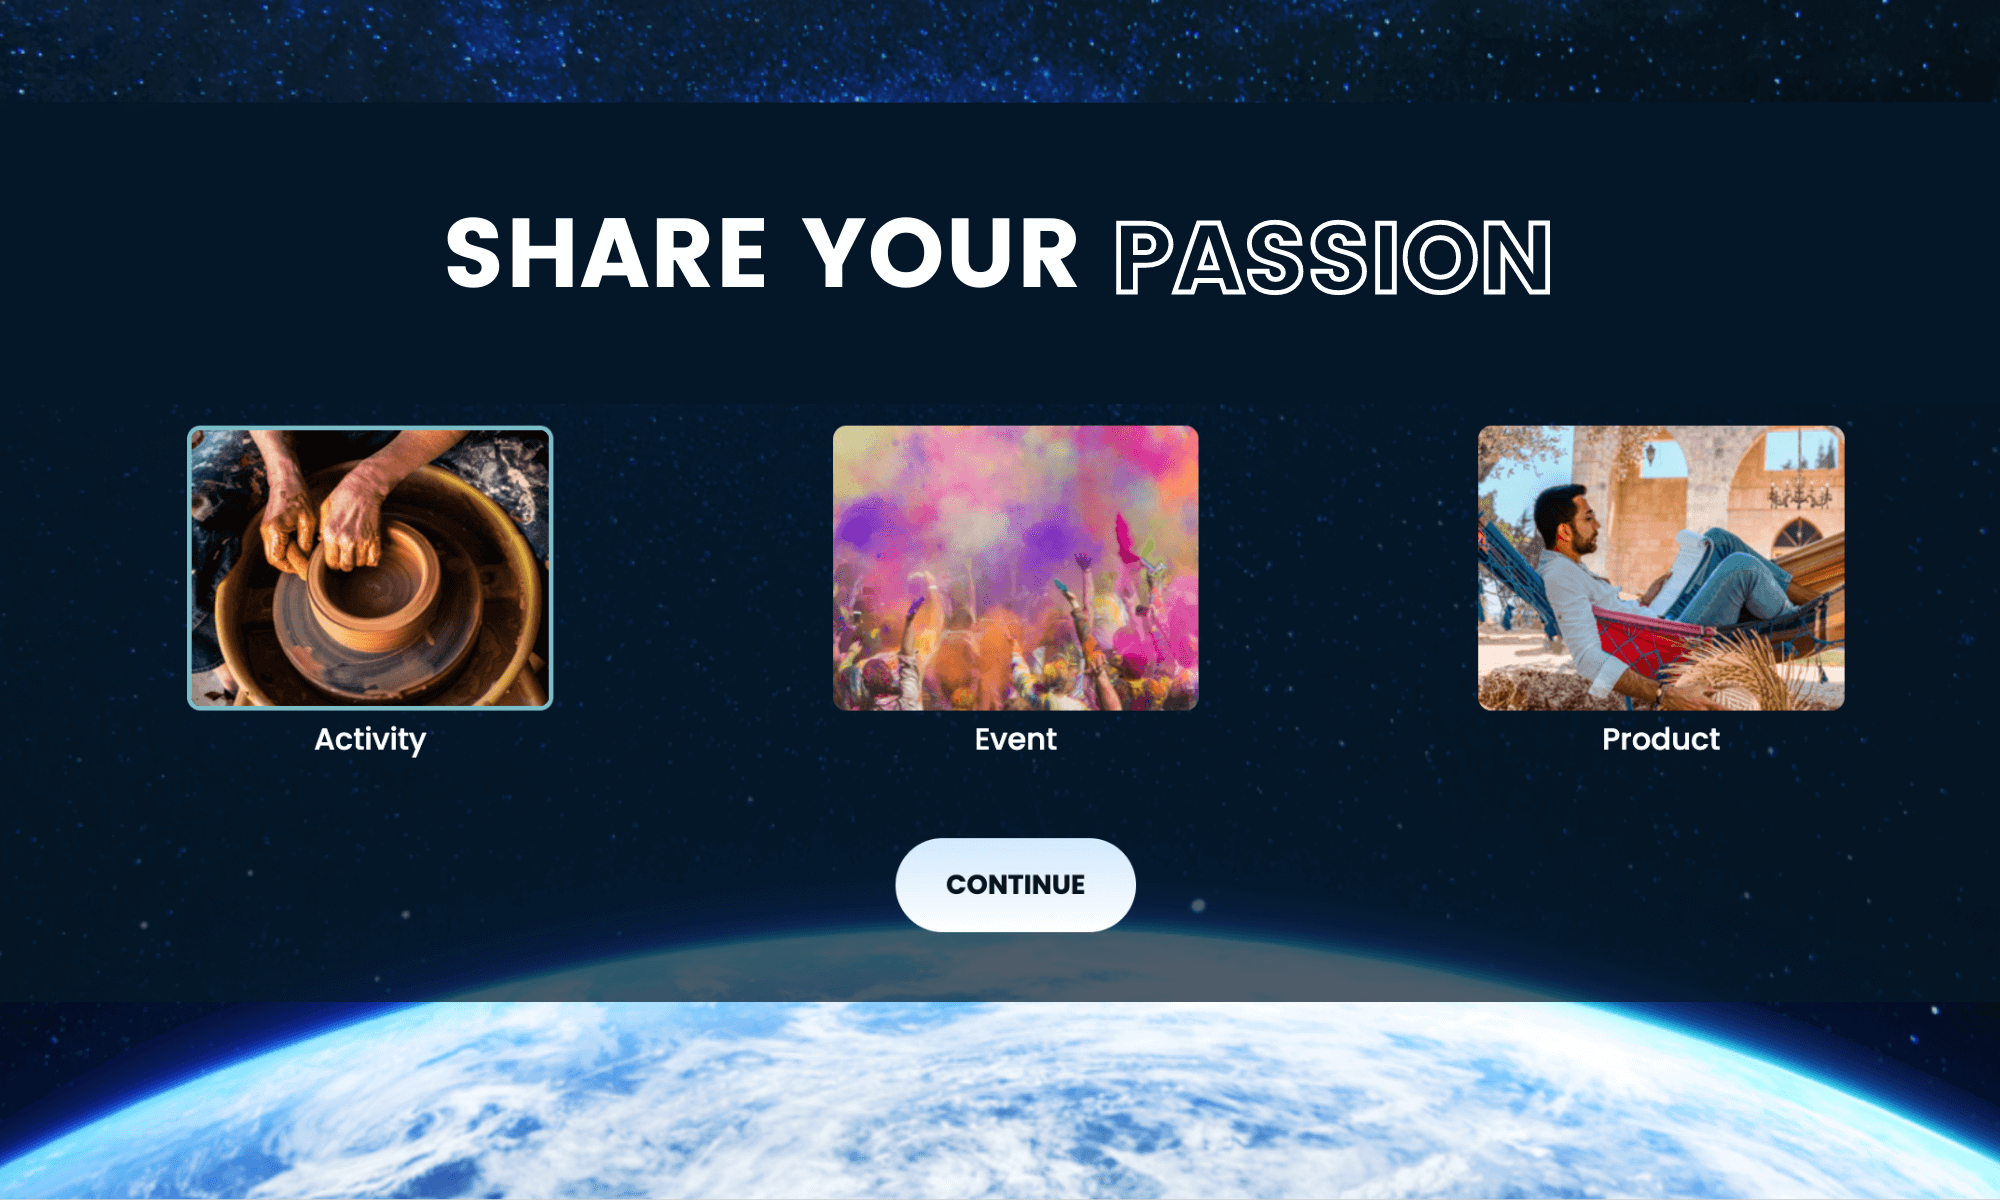 Share your passion with the world. We support Activities, Events, and Products